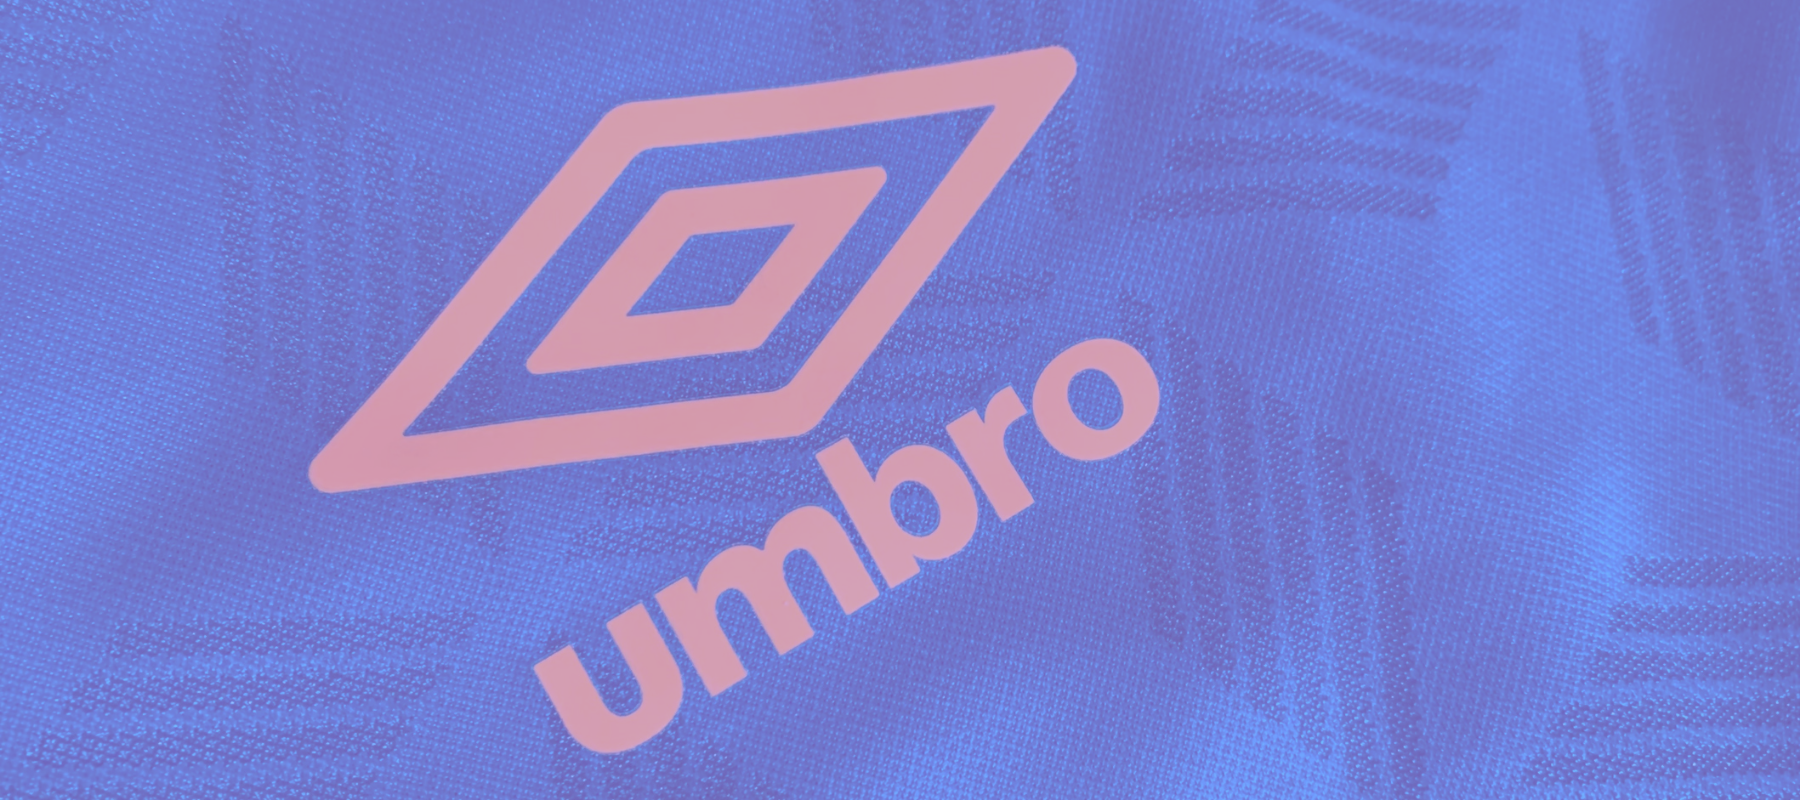 Umbro - the clubhouse leaders